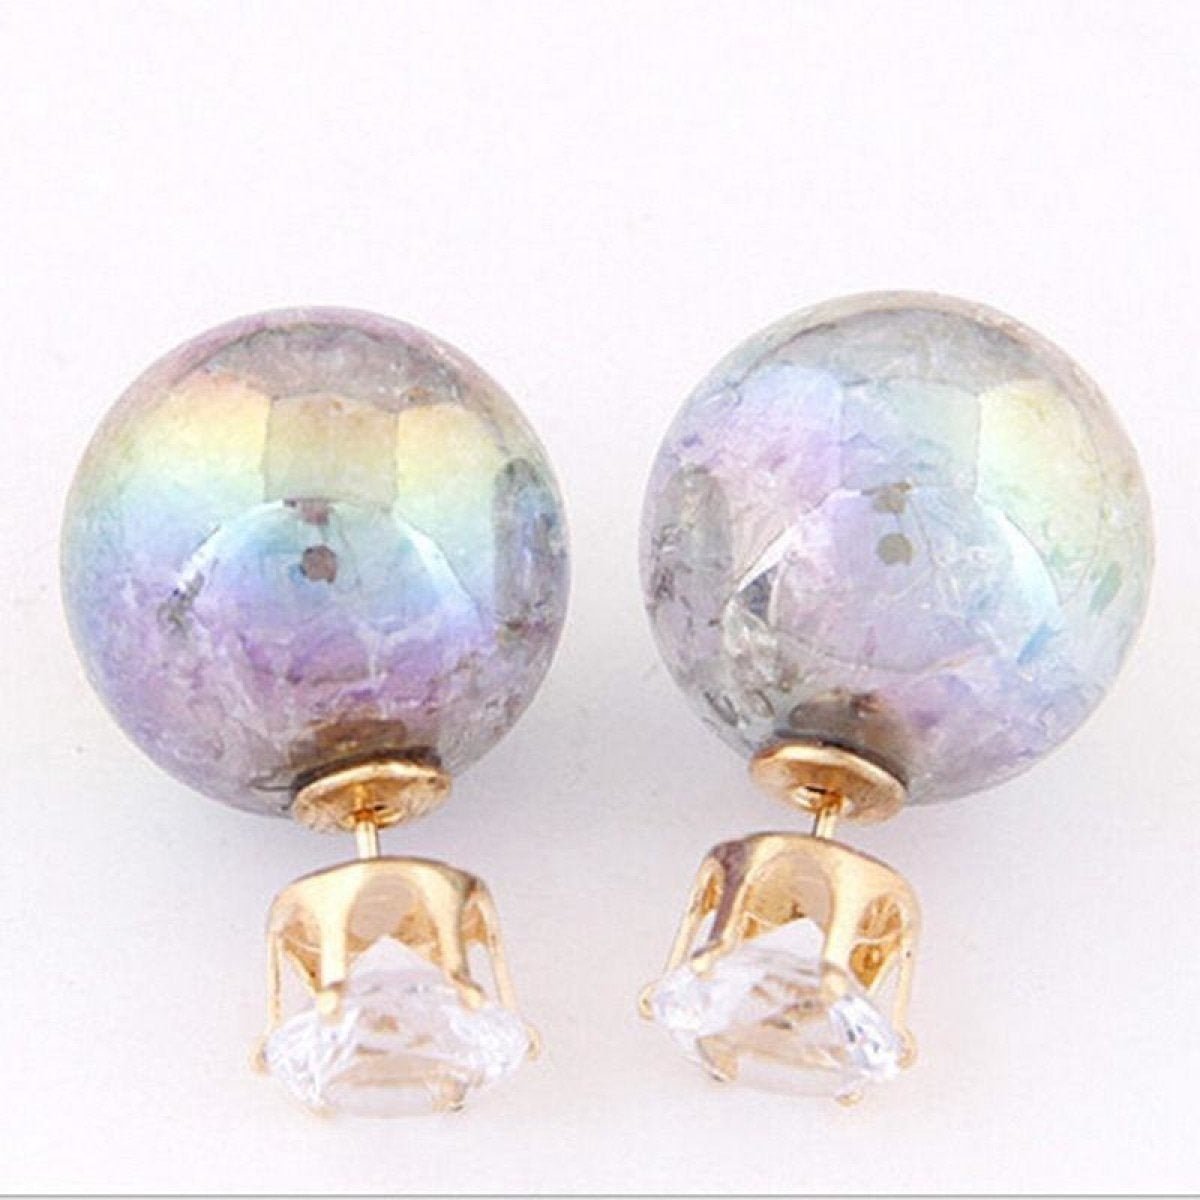 Womens Candy Colour Double Side Round Pearl Earrings Crystal Ball Ear Stud - Grey - Asia Sell